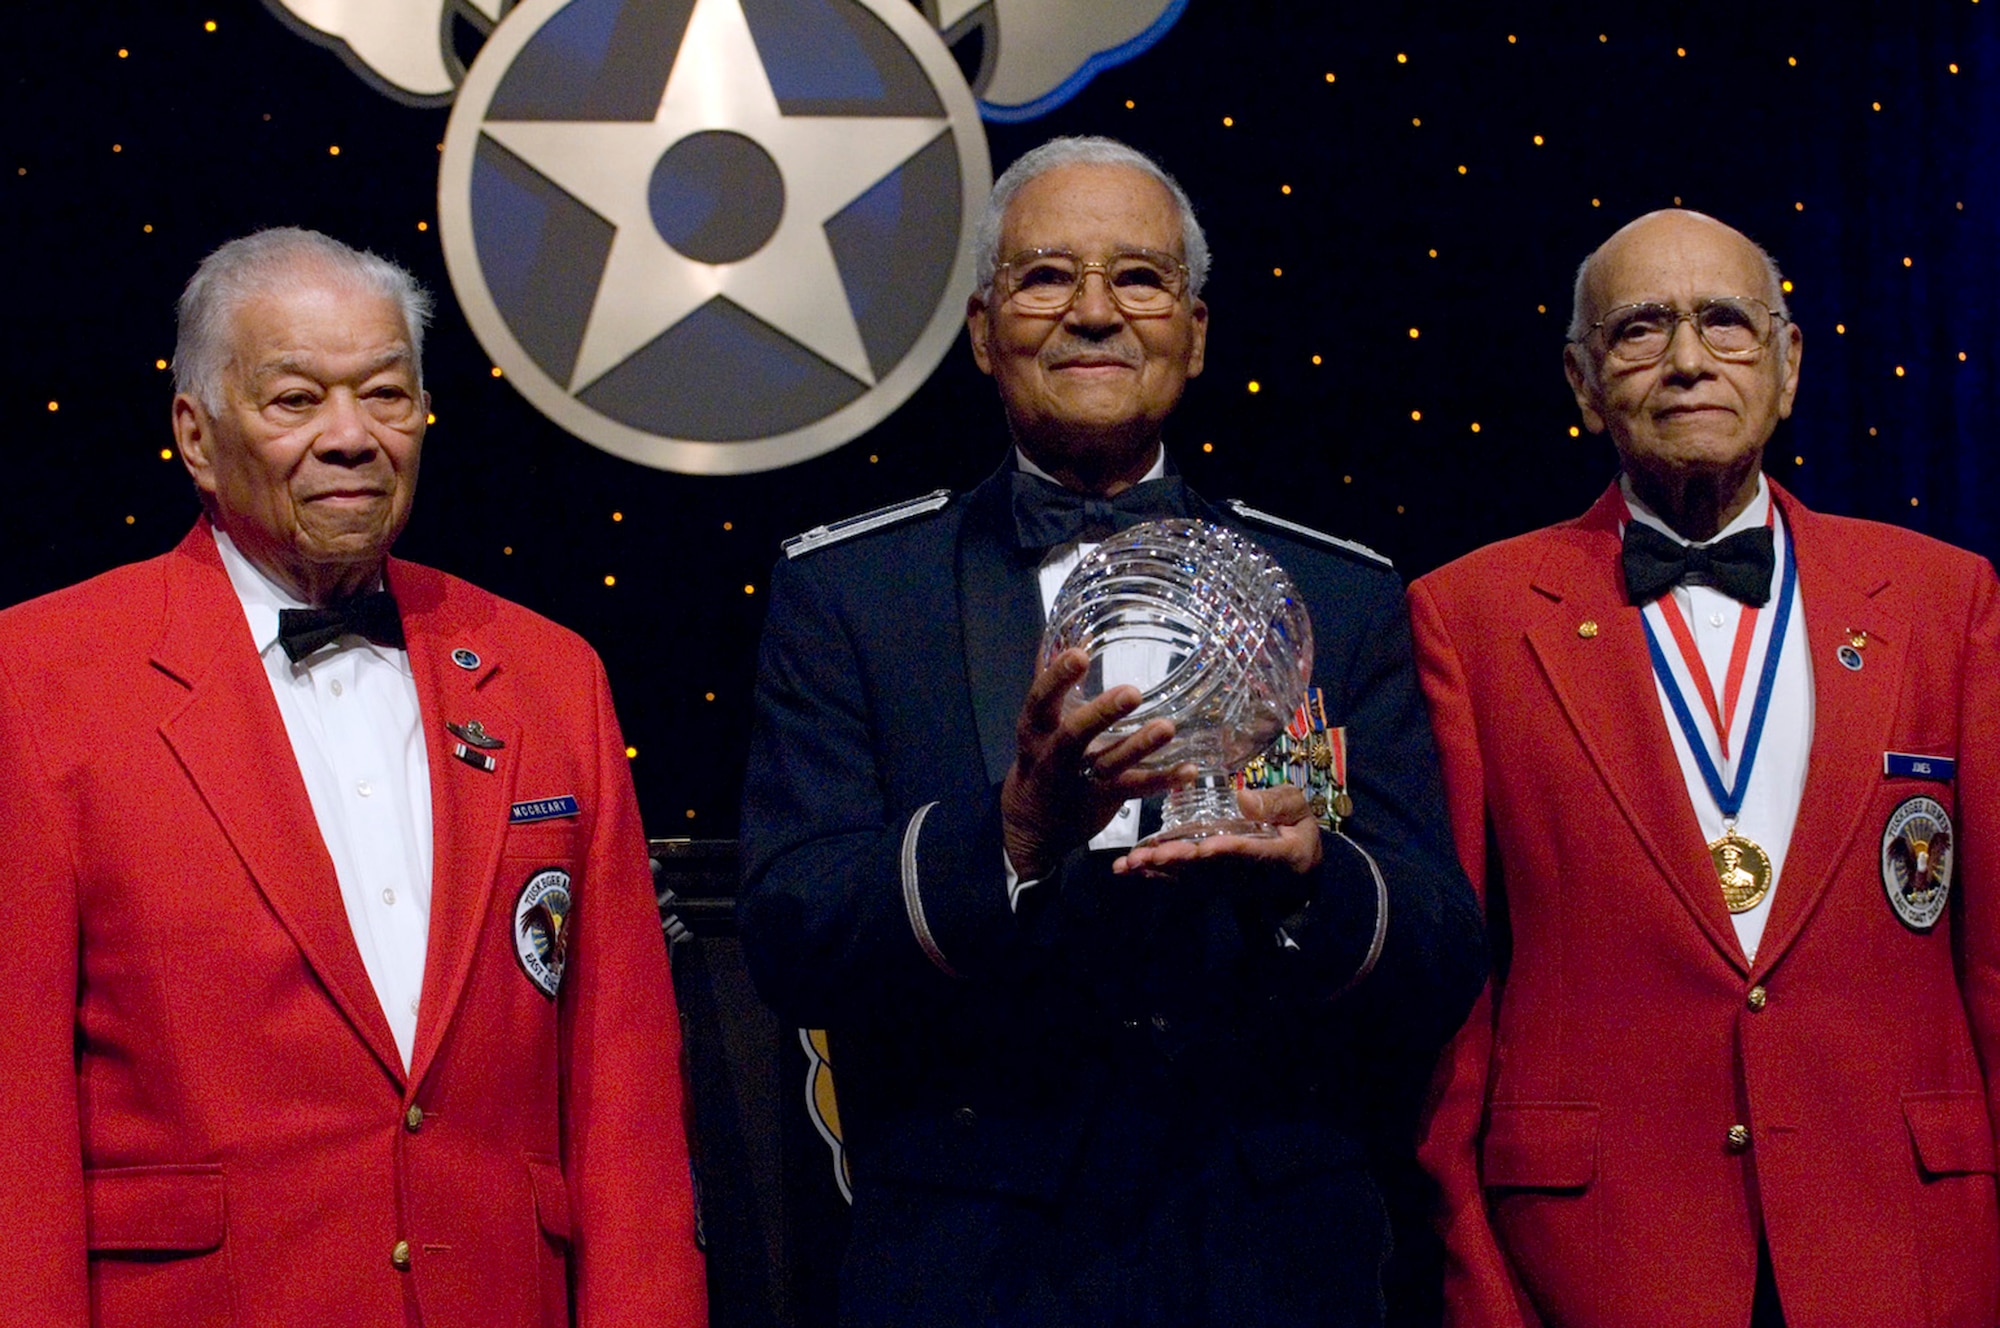 Retired Lt. Col. Walter McCreary, retired Col. Charles McGee and retired Col. Elmer Jones hold the Lifetime Achievement Award Sept. 16, 2009, at the Air Force anniversary dinner held at the Gaylord National Hotel and Convention Center in National Harbor, Md. Colonels Jones, McGee and McCreary are members of the Tuskegee Airmen. The dinner was the end of the 2009 Air Force Association Air & Space Conference and Technology Exposition. (U.S. Air Force photo/Staff Sgt. Desiree N. Palacios)